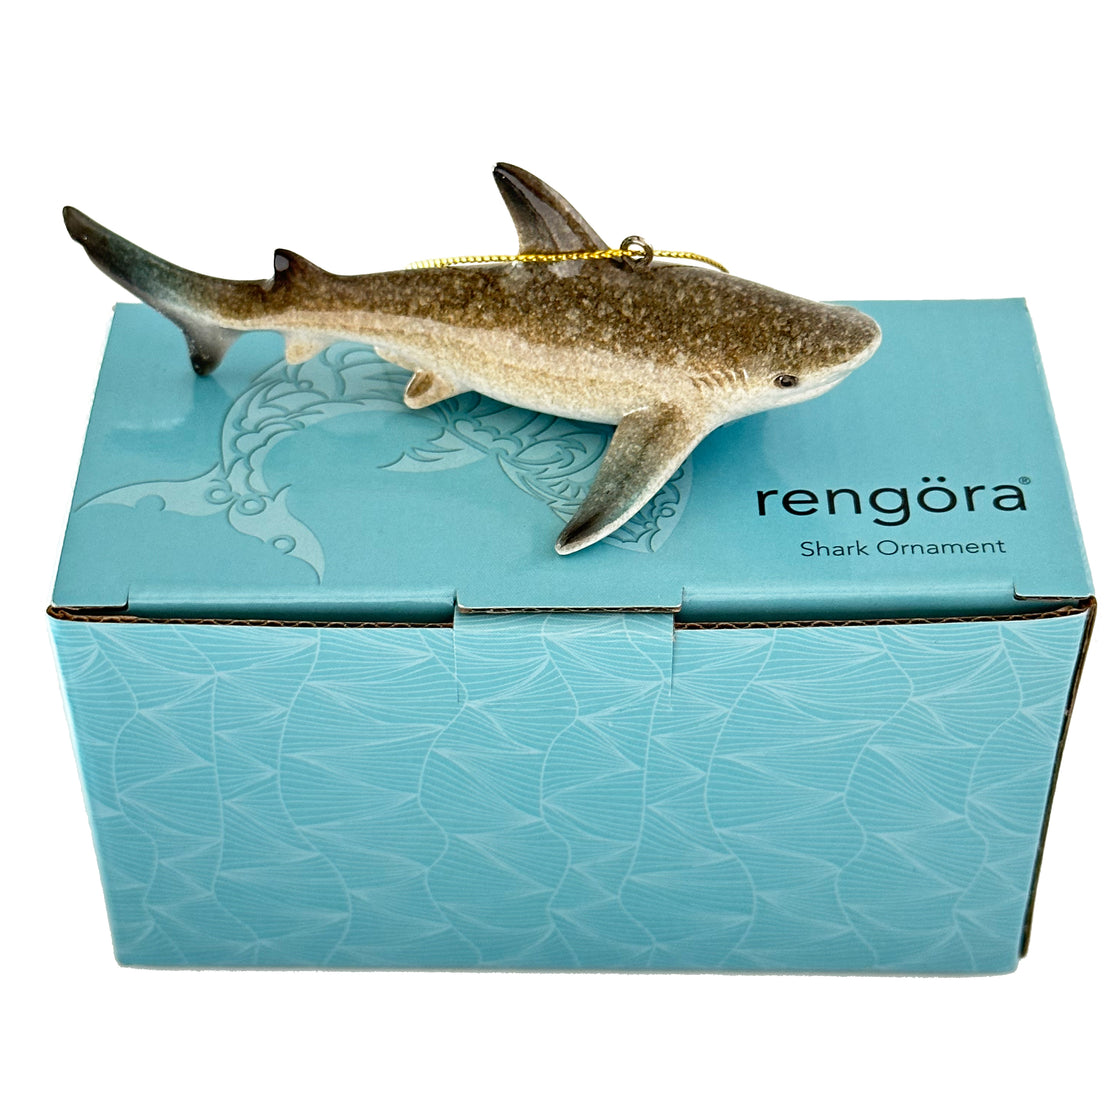 A rengöra shark ornament comes in its distinctive packaging adorned with a shark-themed design